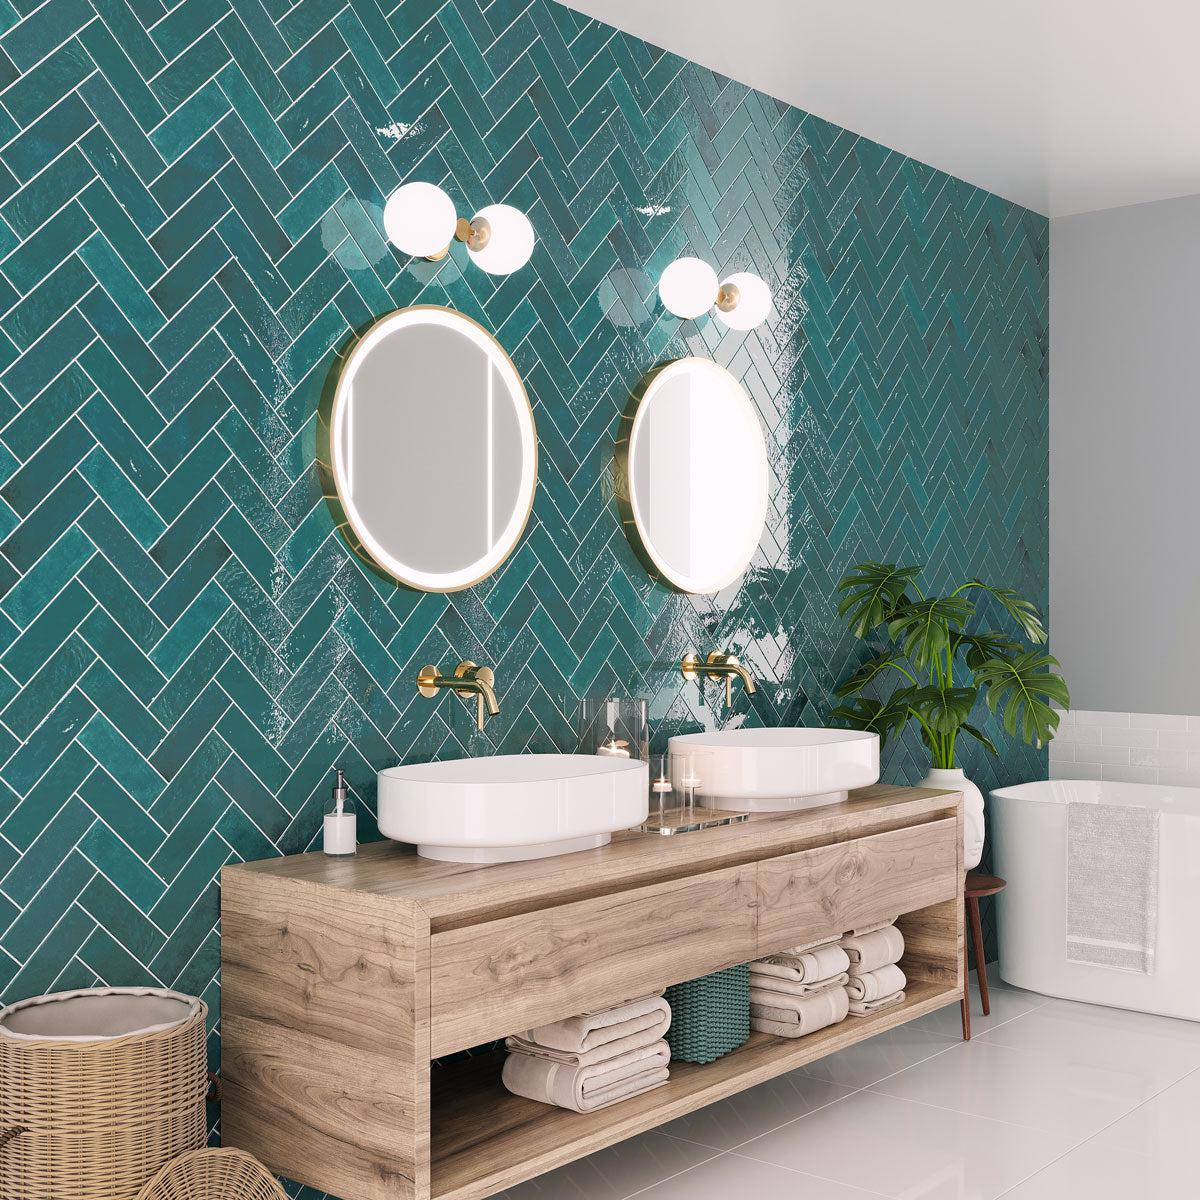 Green bathroom accent wall with ceramic subway tiles in a herringbone layout